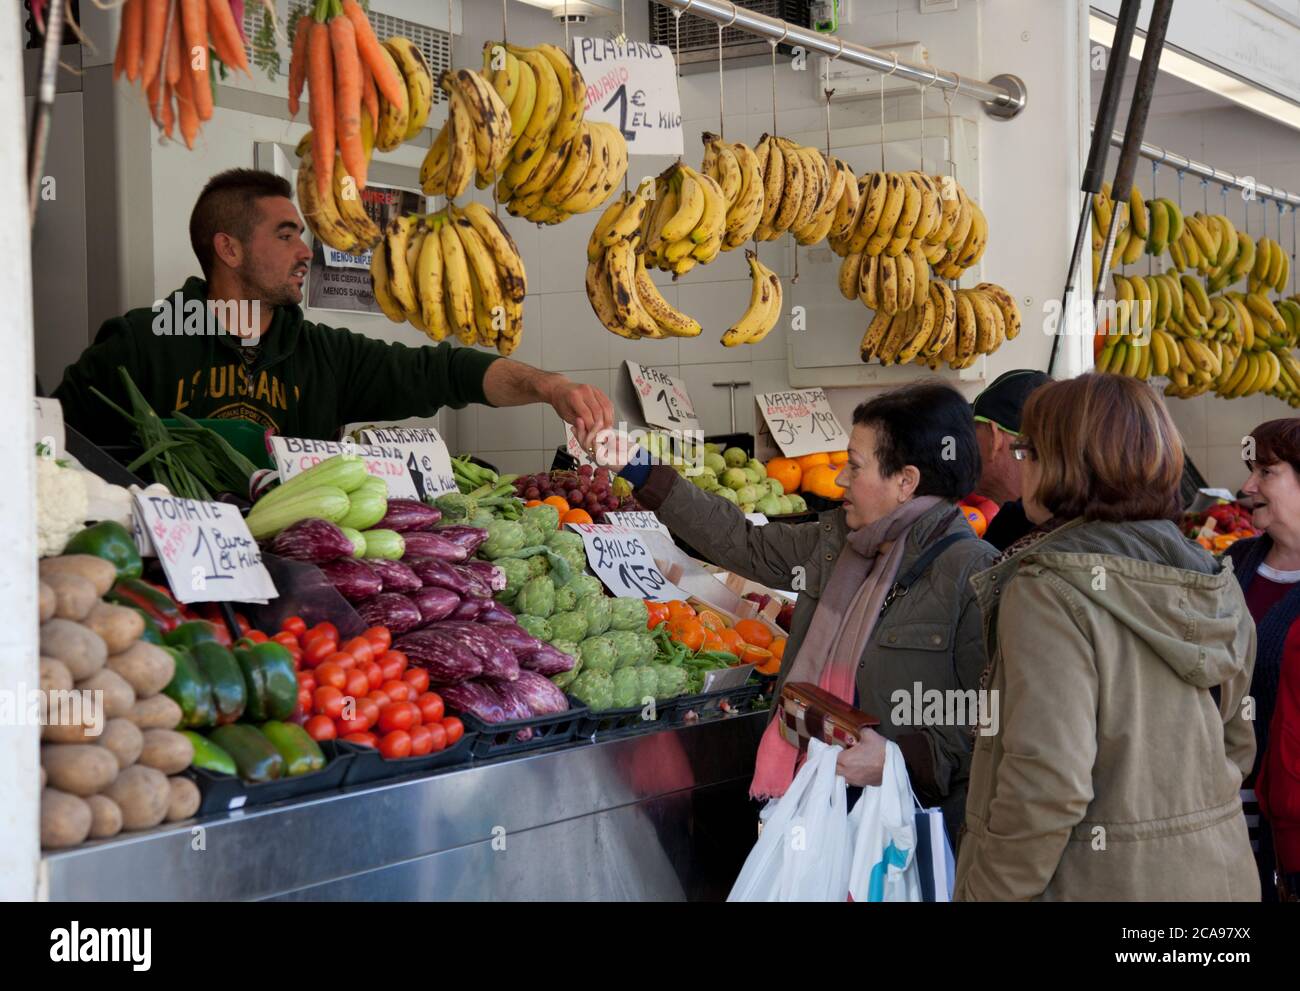 Shoppers at the busy vegetable and fish market in Cadiz Stock Photo